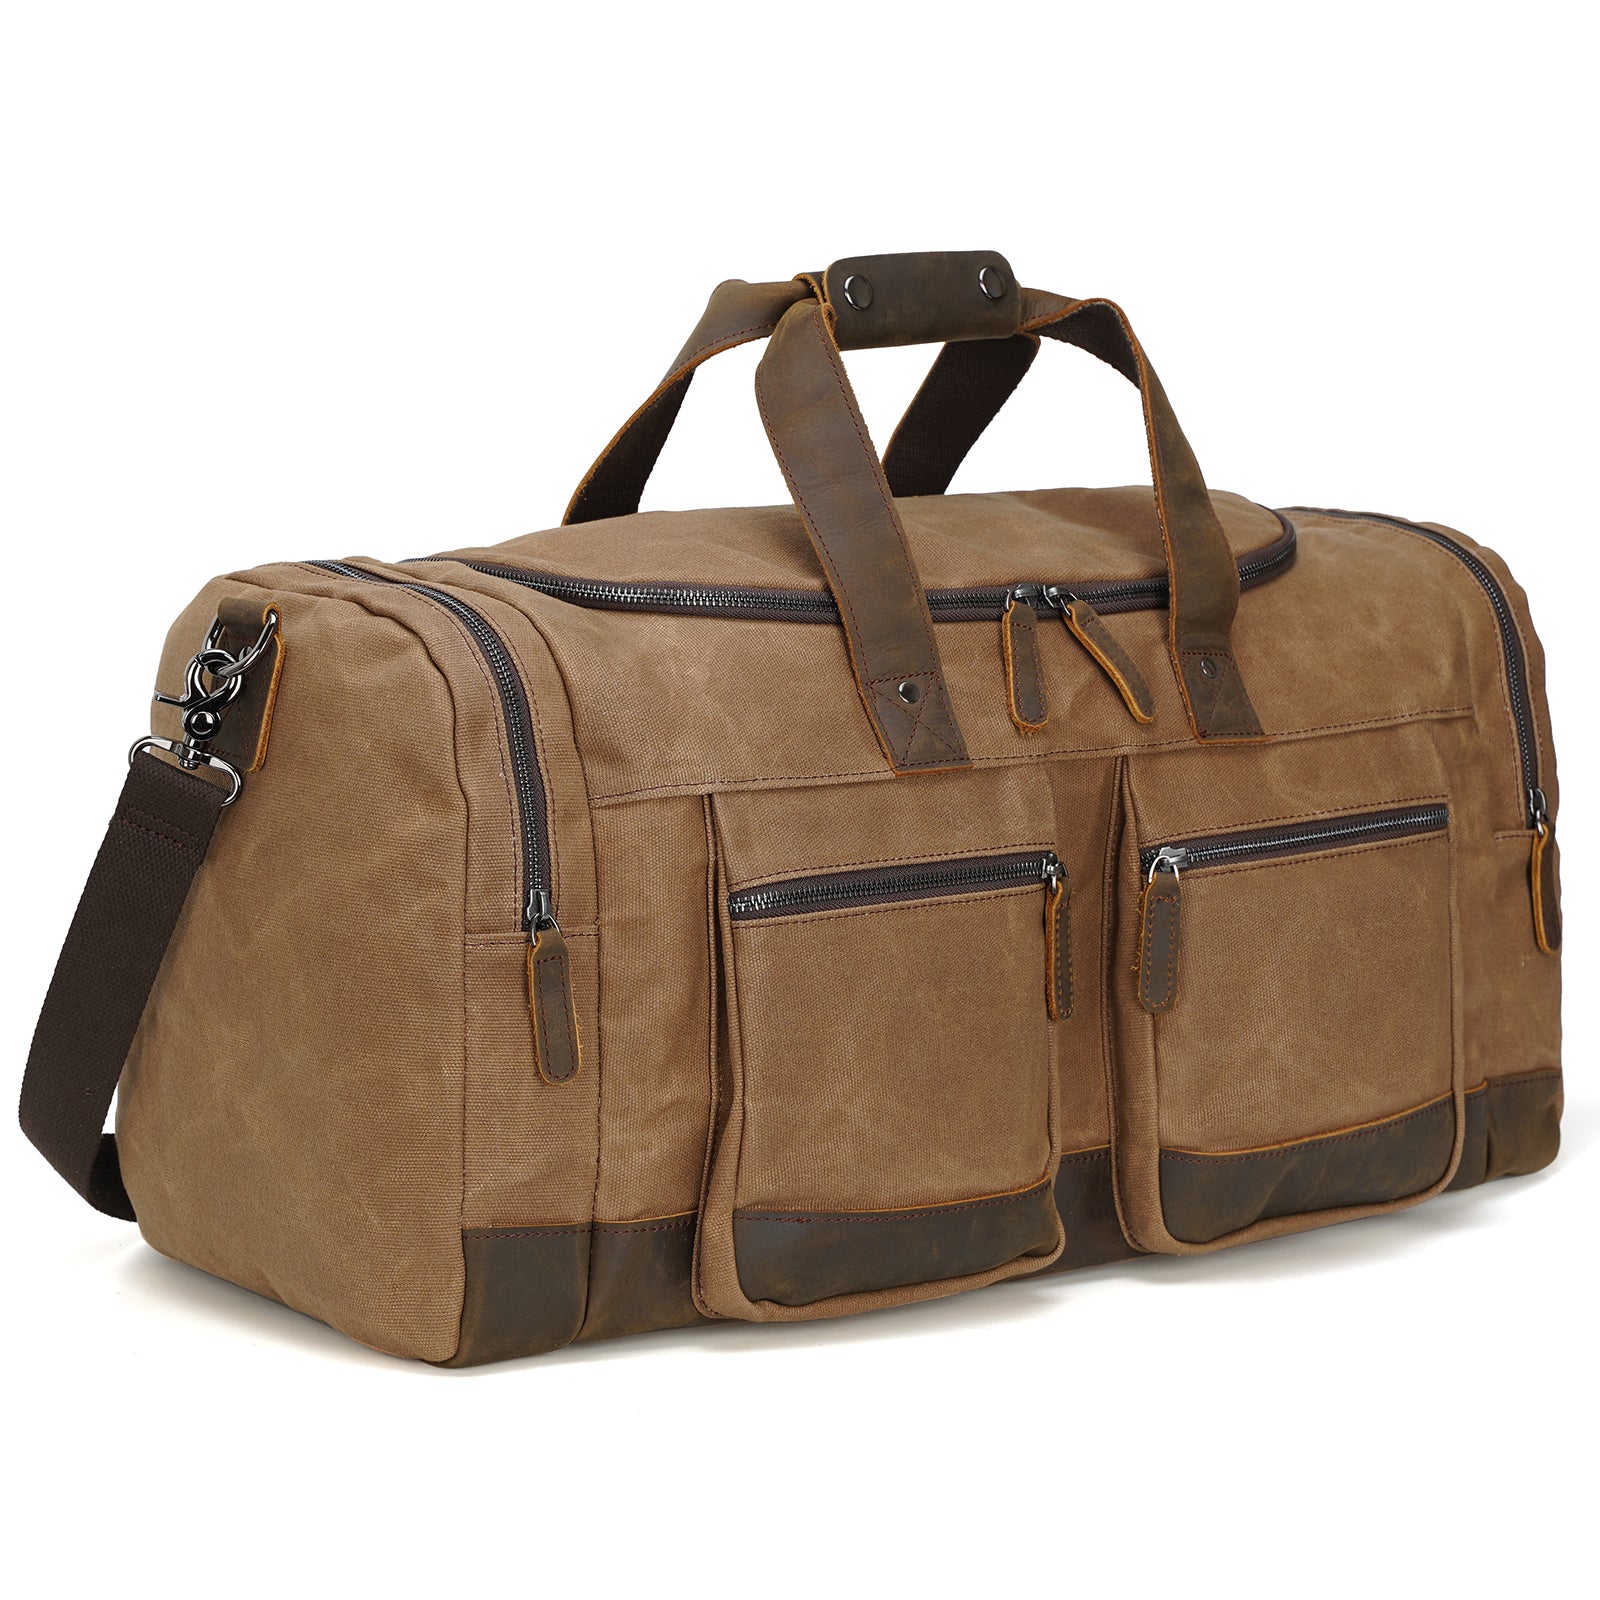 Polare 23” Waxed Canvas Cowhide Leather Travel Duffel Carry on Bag (Brown)